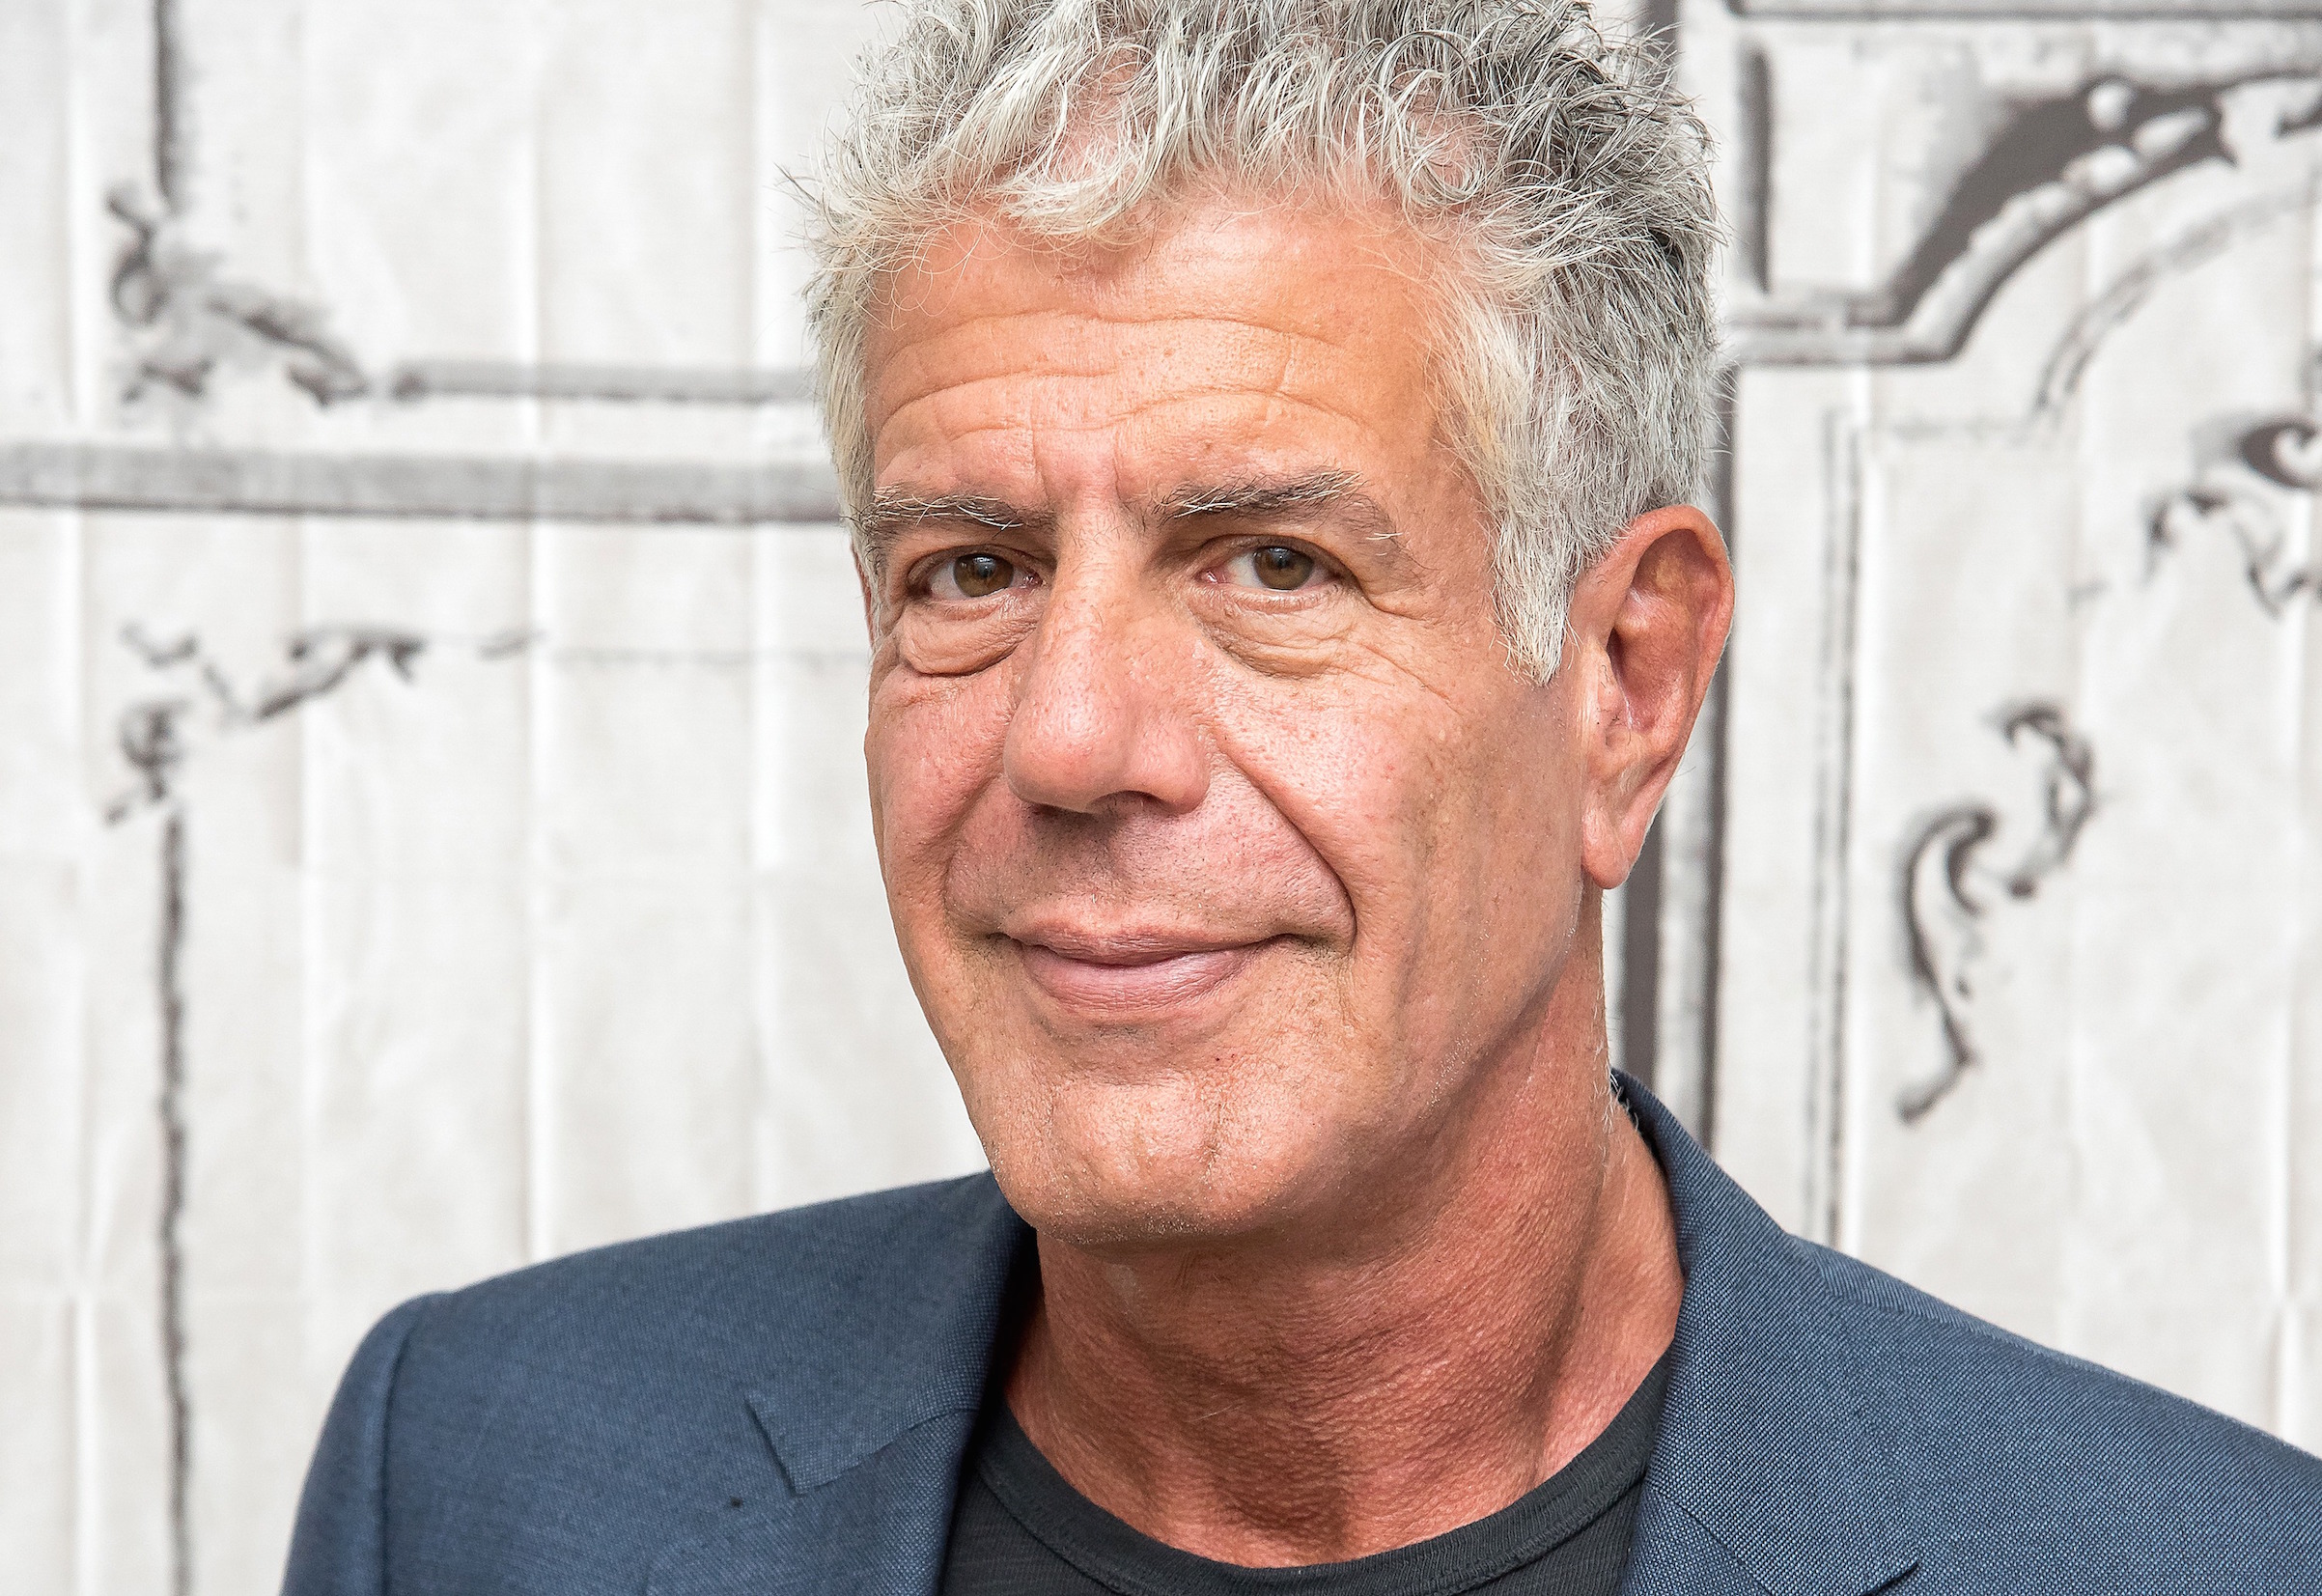 Anthony Bourdain visits the Build Series to discuss "Raw Craft" at AOL HQ on Nov. 2, 2016 in New York City. (Mike Pont—WireImage/Getty Images)